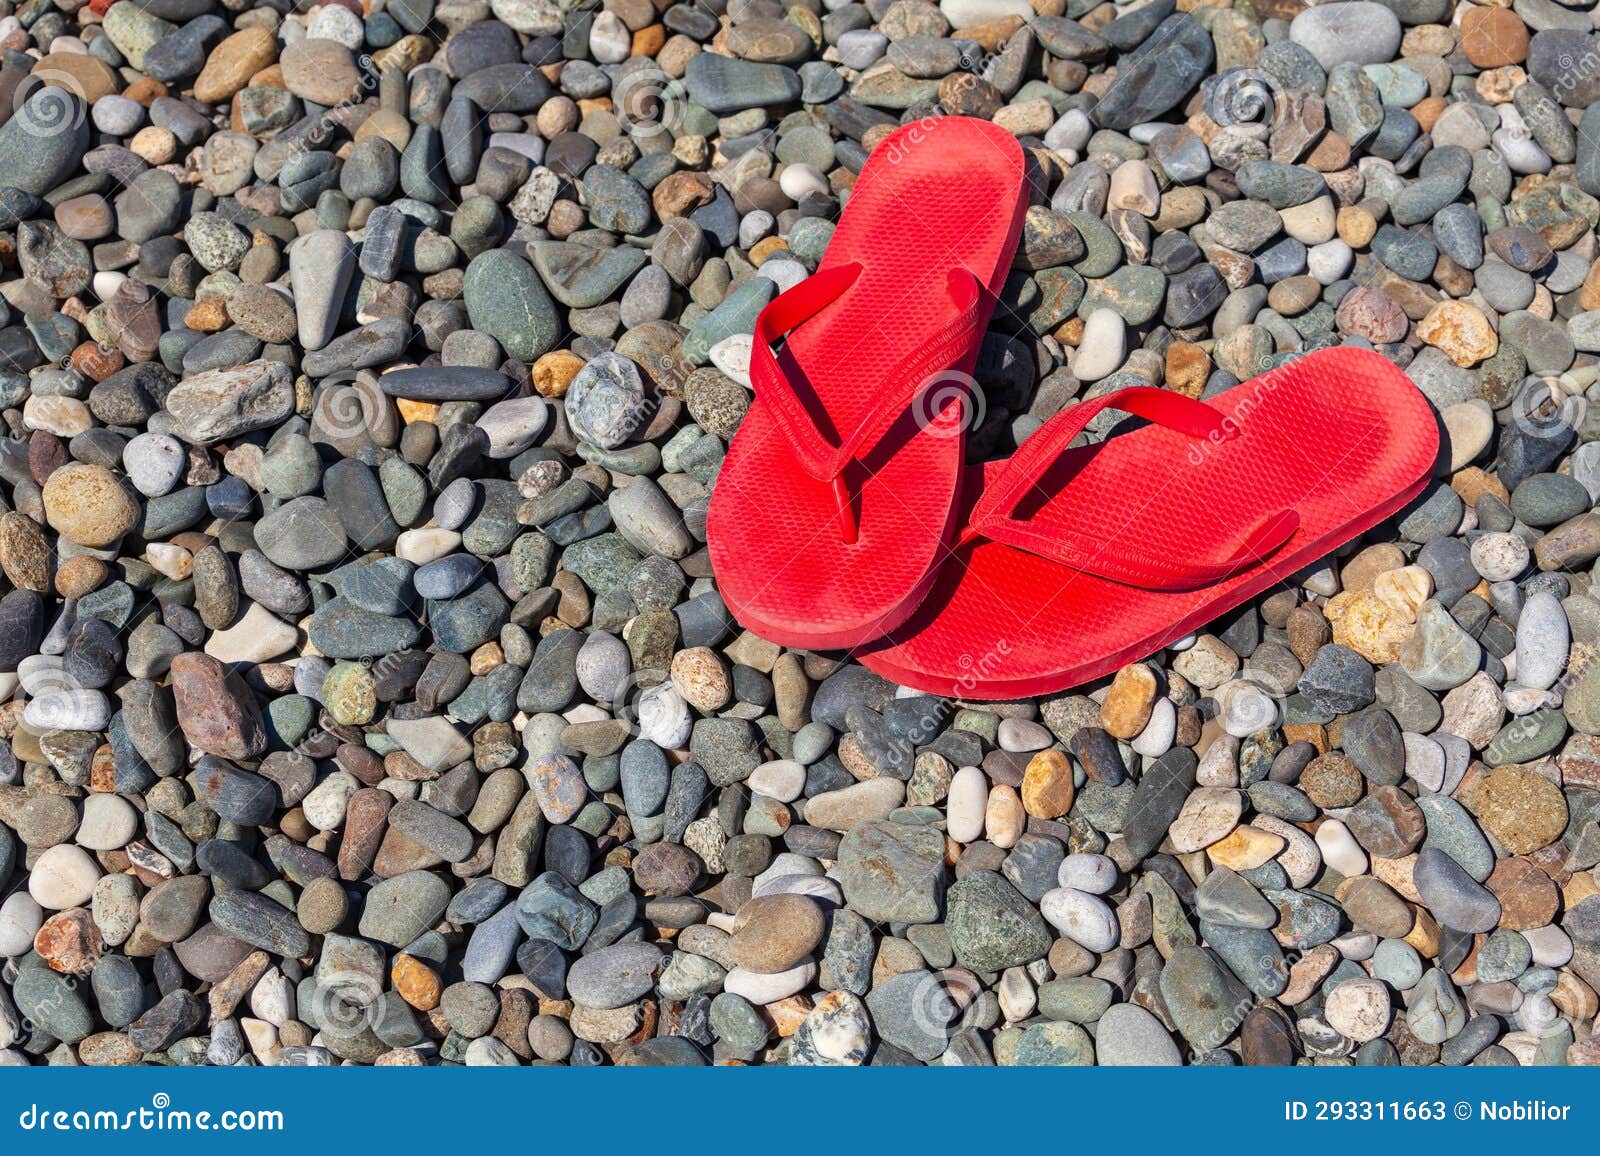 Red Flip Flops on a Pebble Beach Stock Image - Image of outdoor, pebble ...